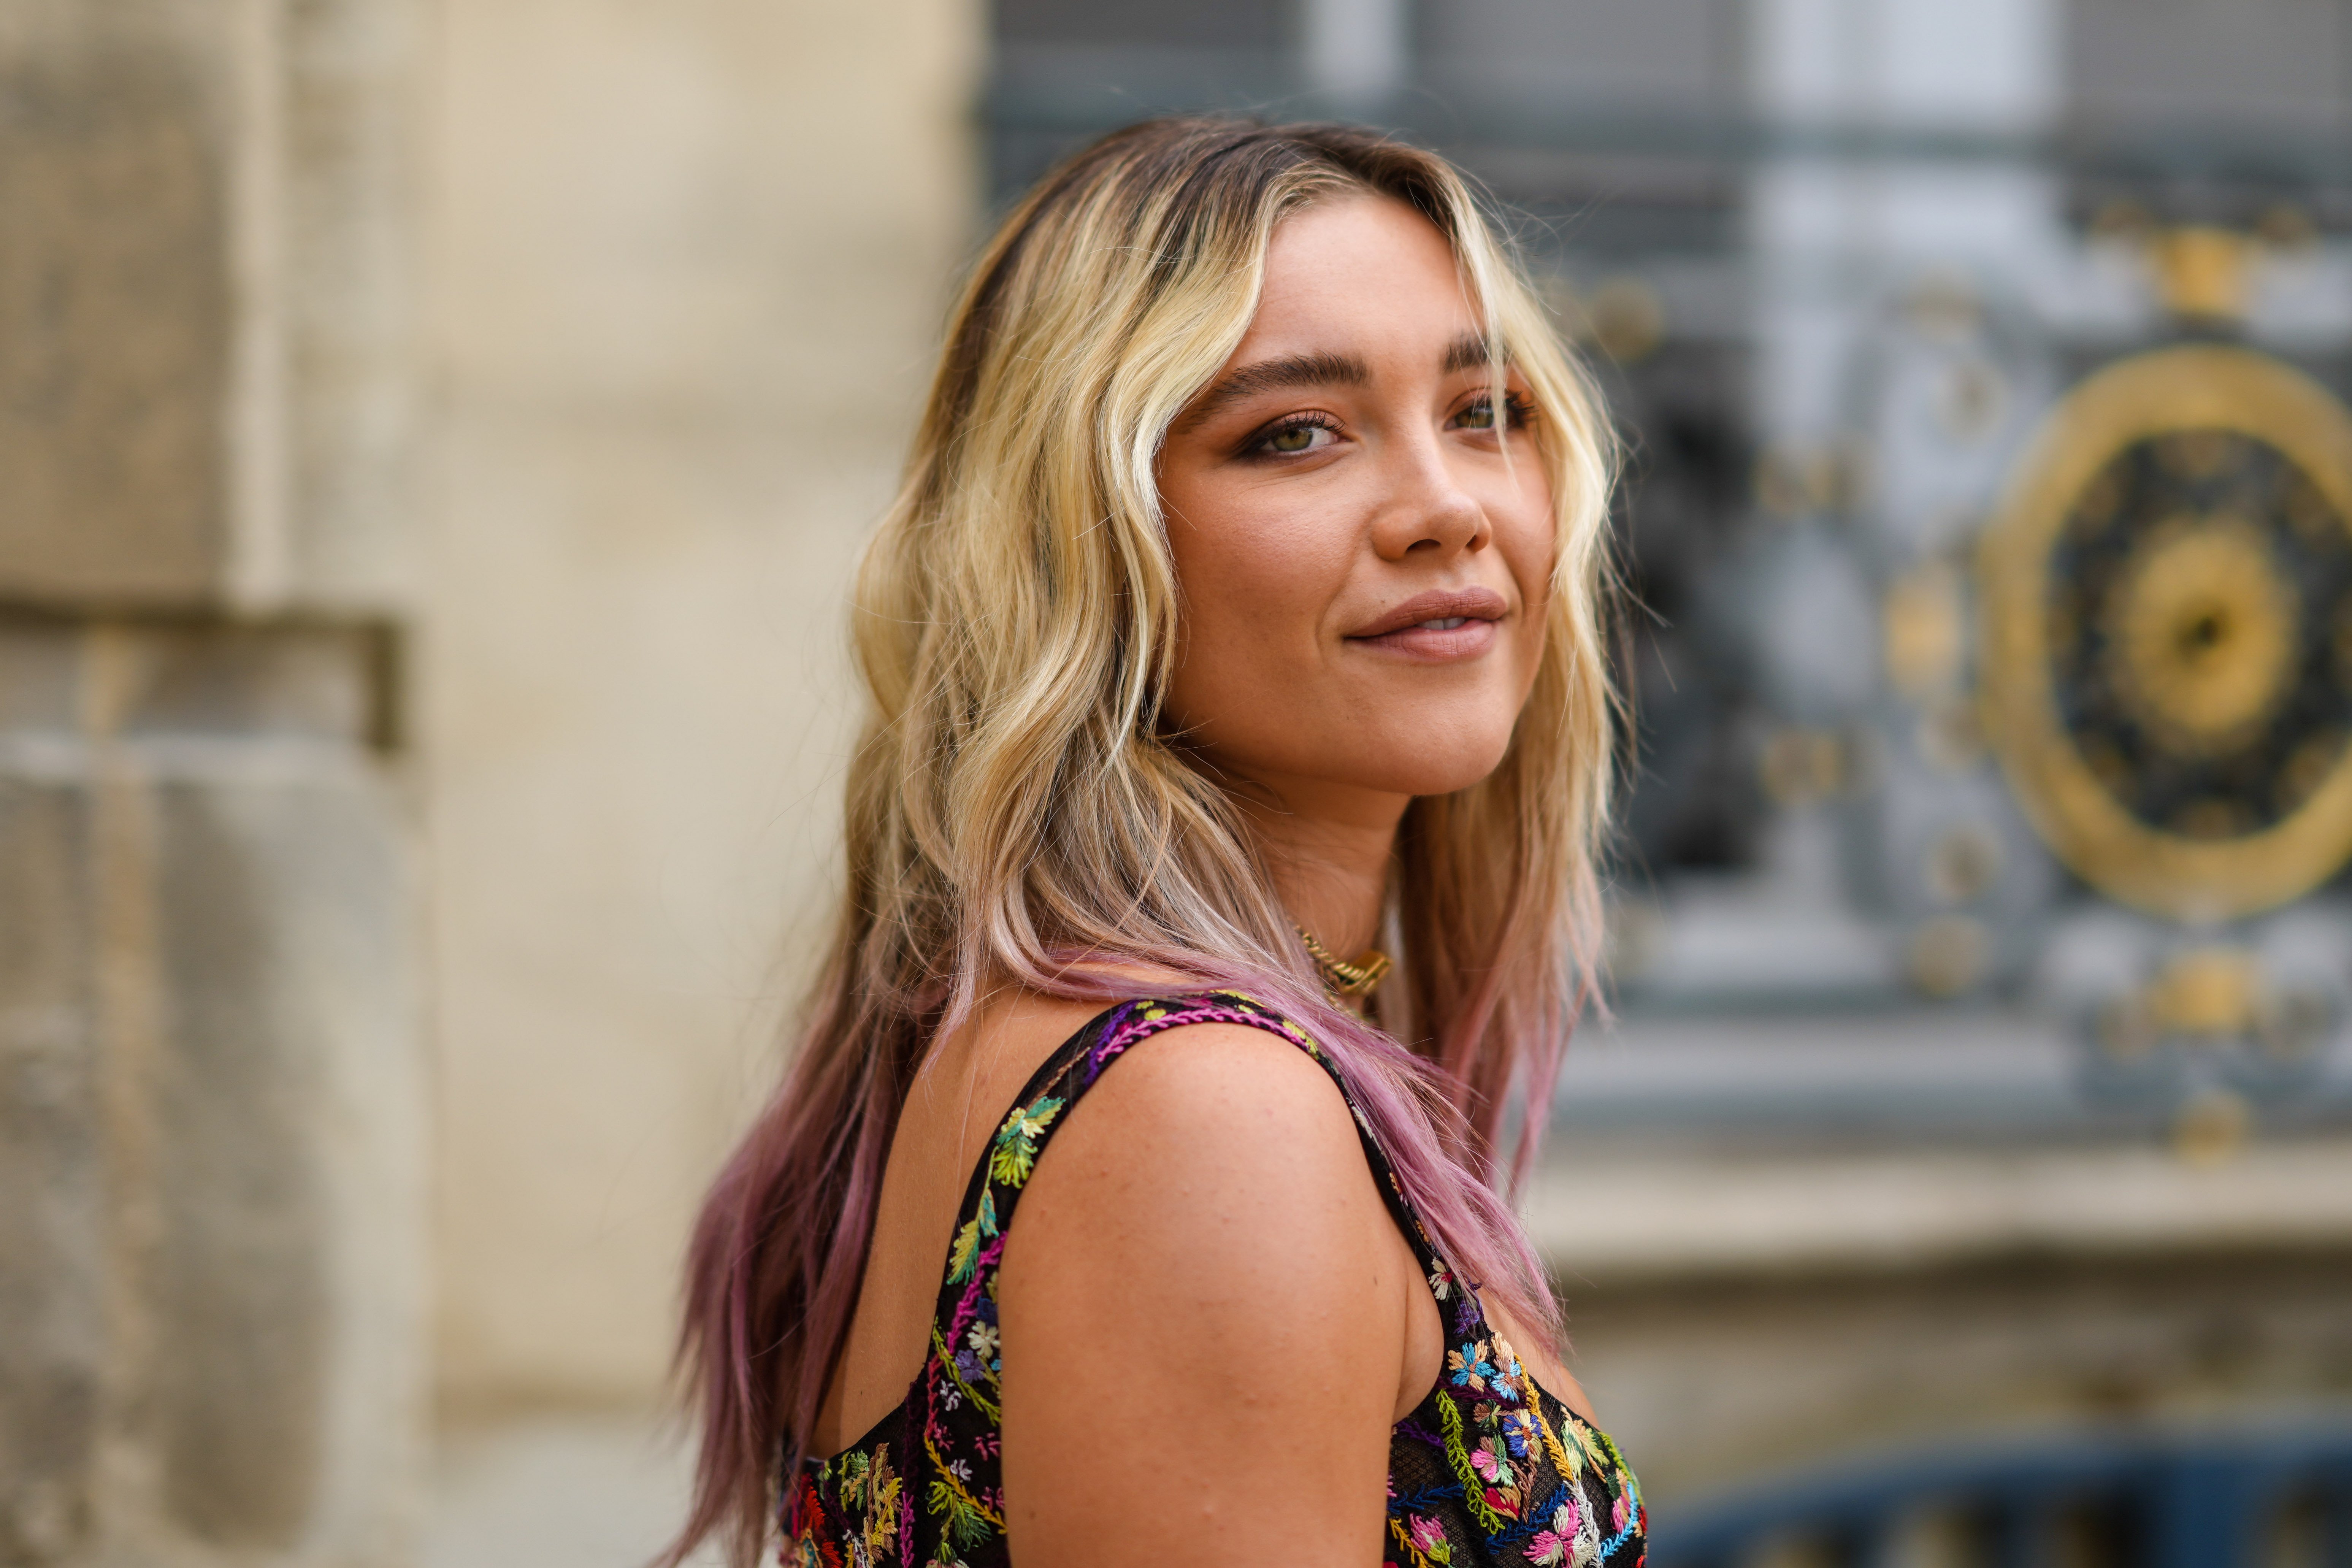 Florence Pugh at Paris Fashion Week on July 05, 2021 in Paris, France. | Source: Getty Images